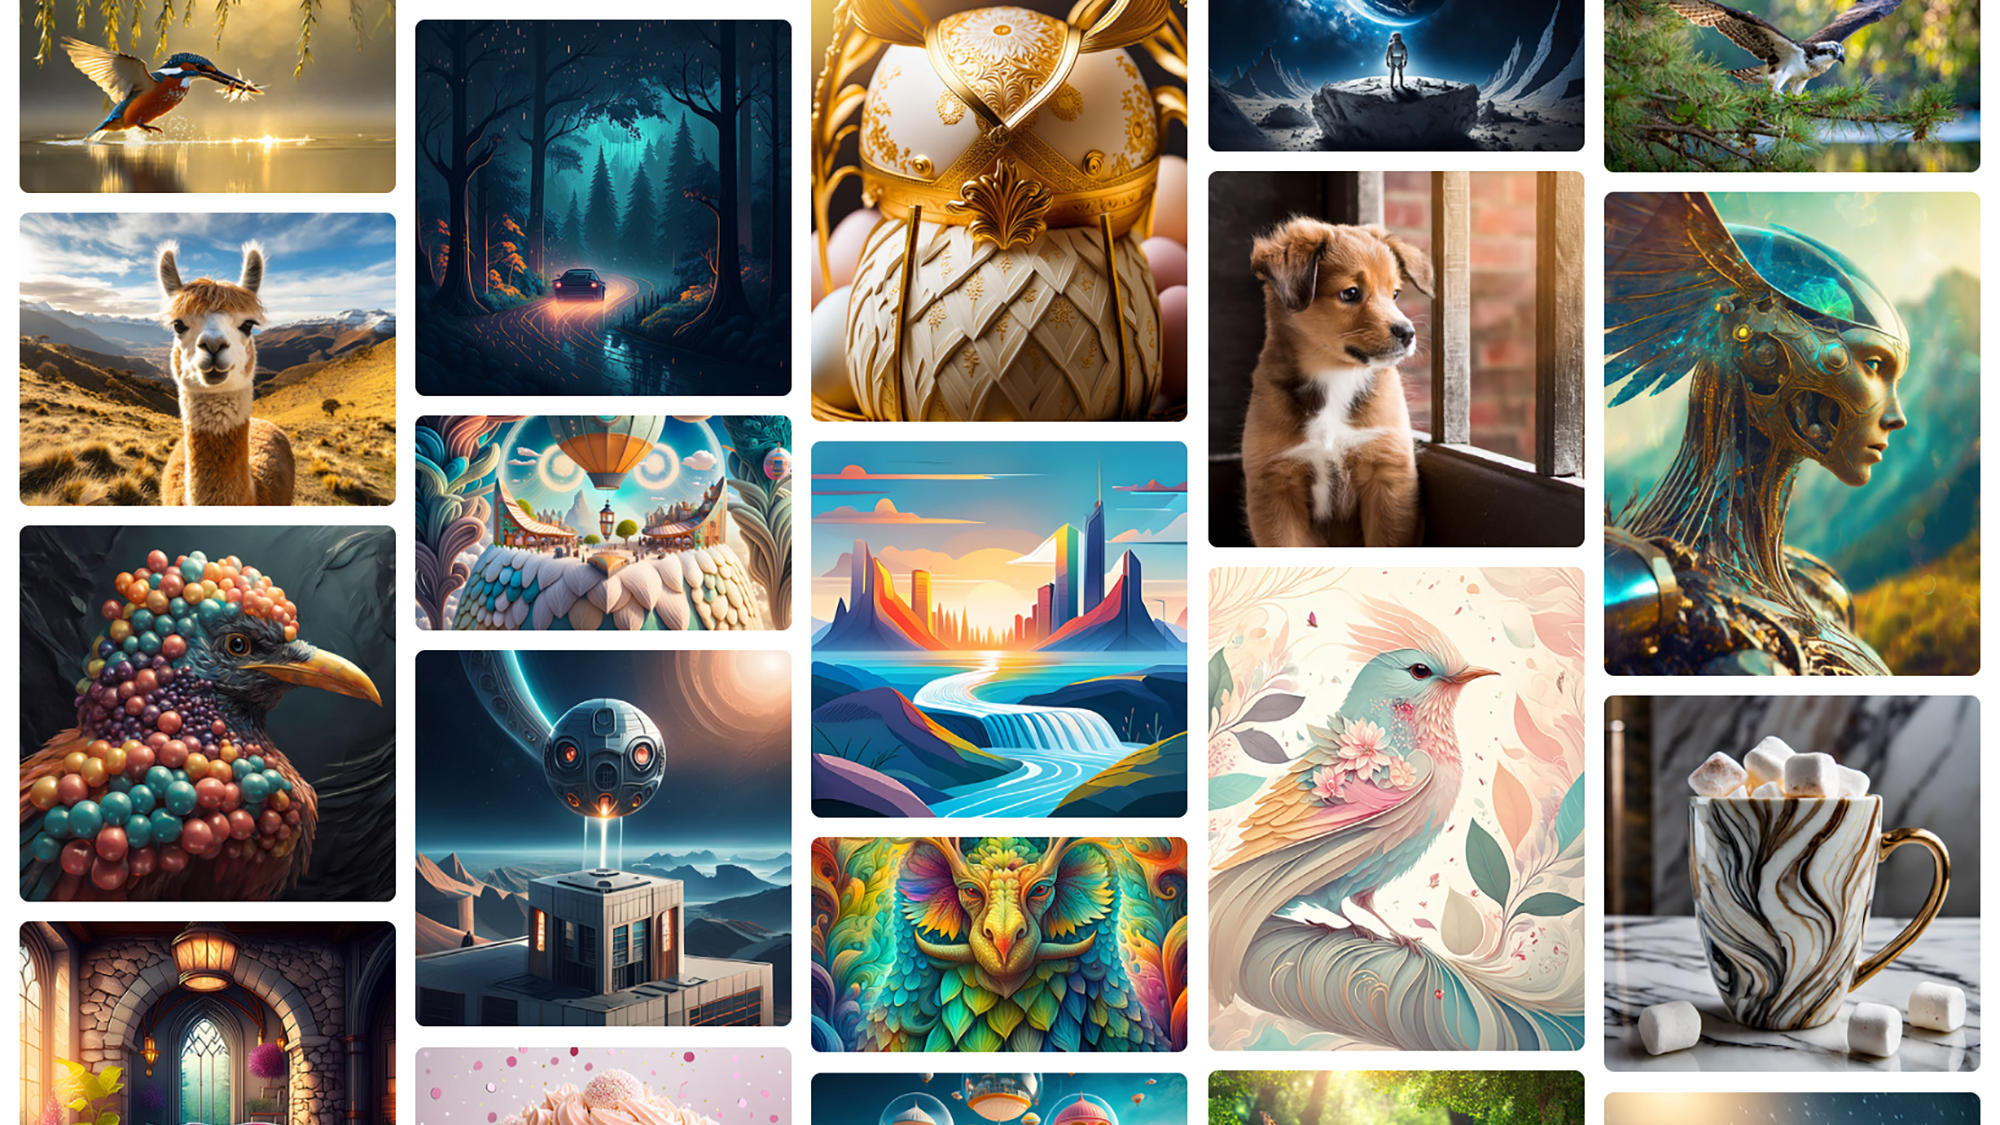 examples of AI art, including animals and mythical creatures